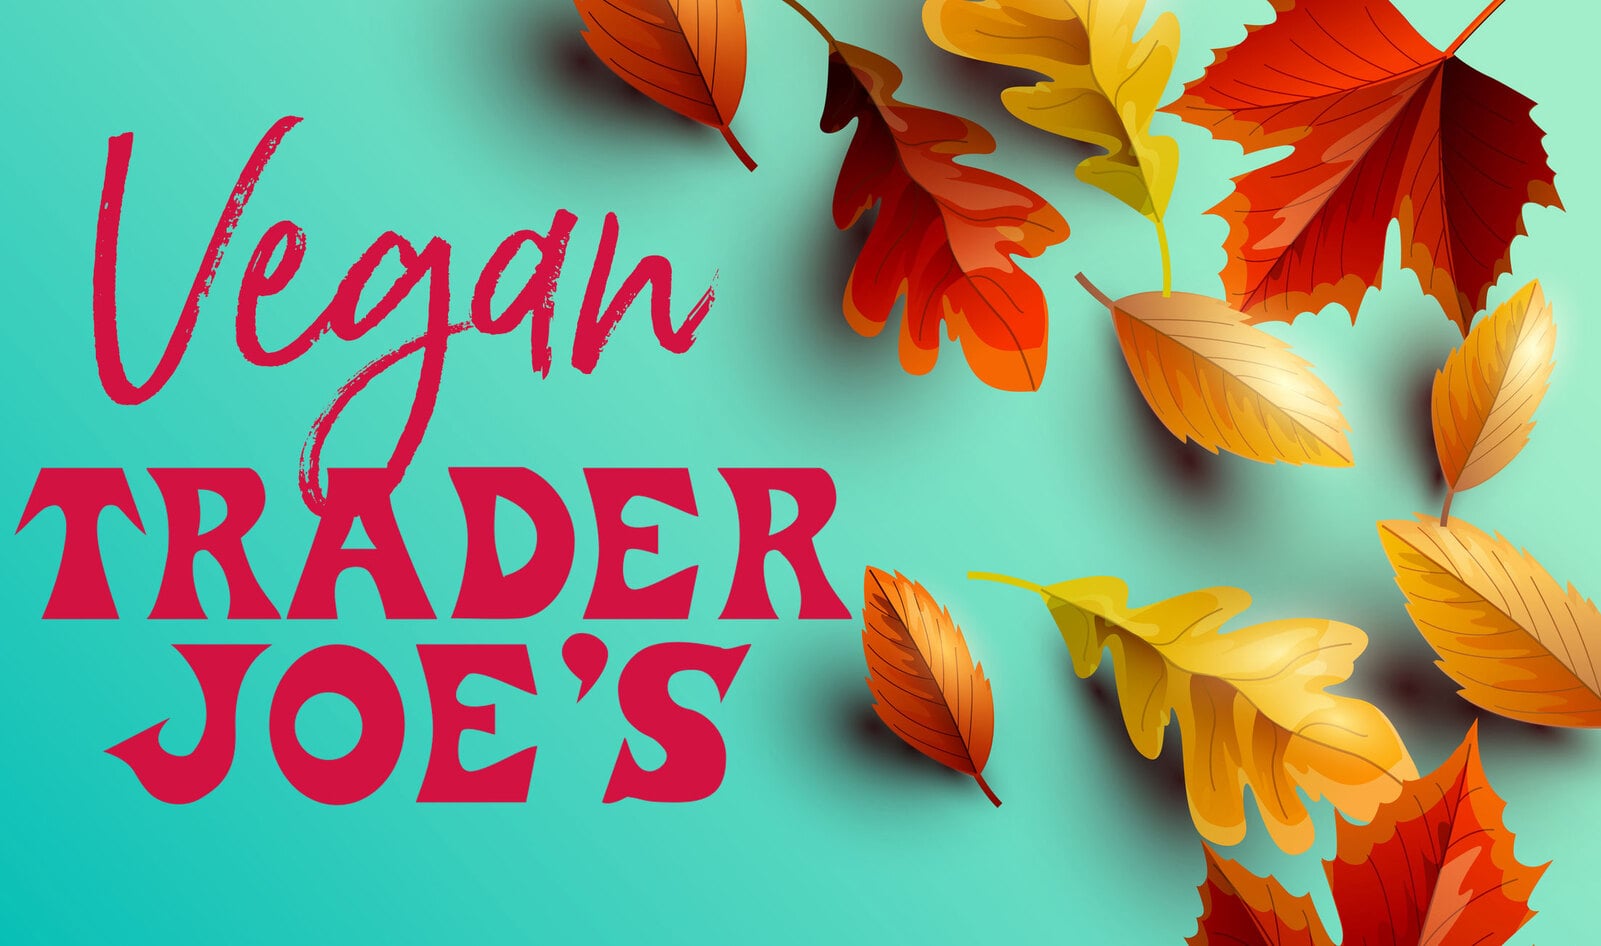 10 Secretly Vegan Foods You Can Find at Trader Joe’s This Fall&nbsp;